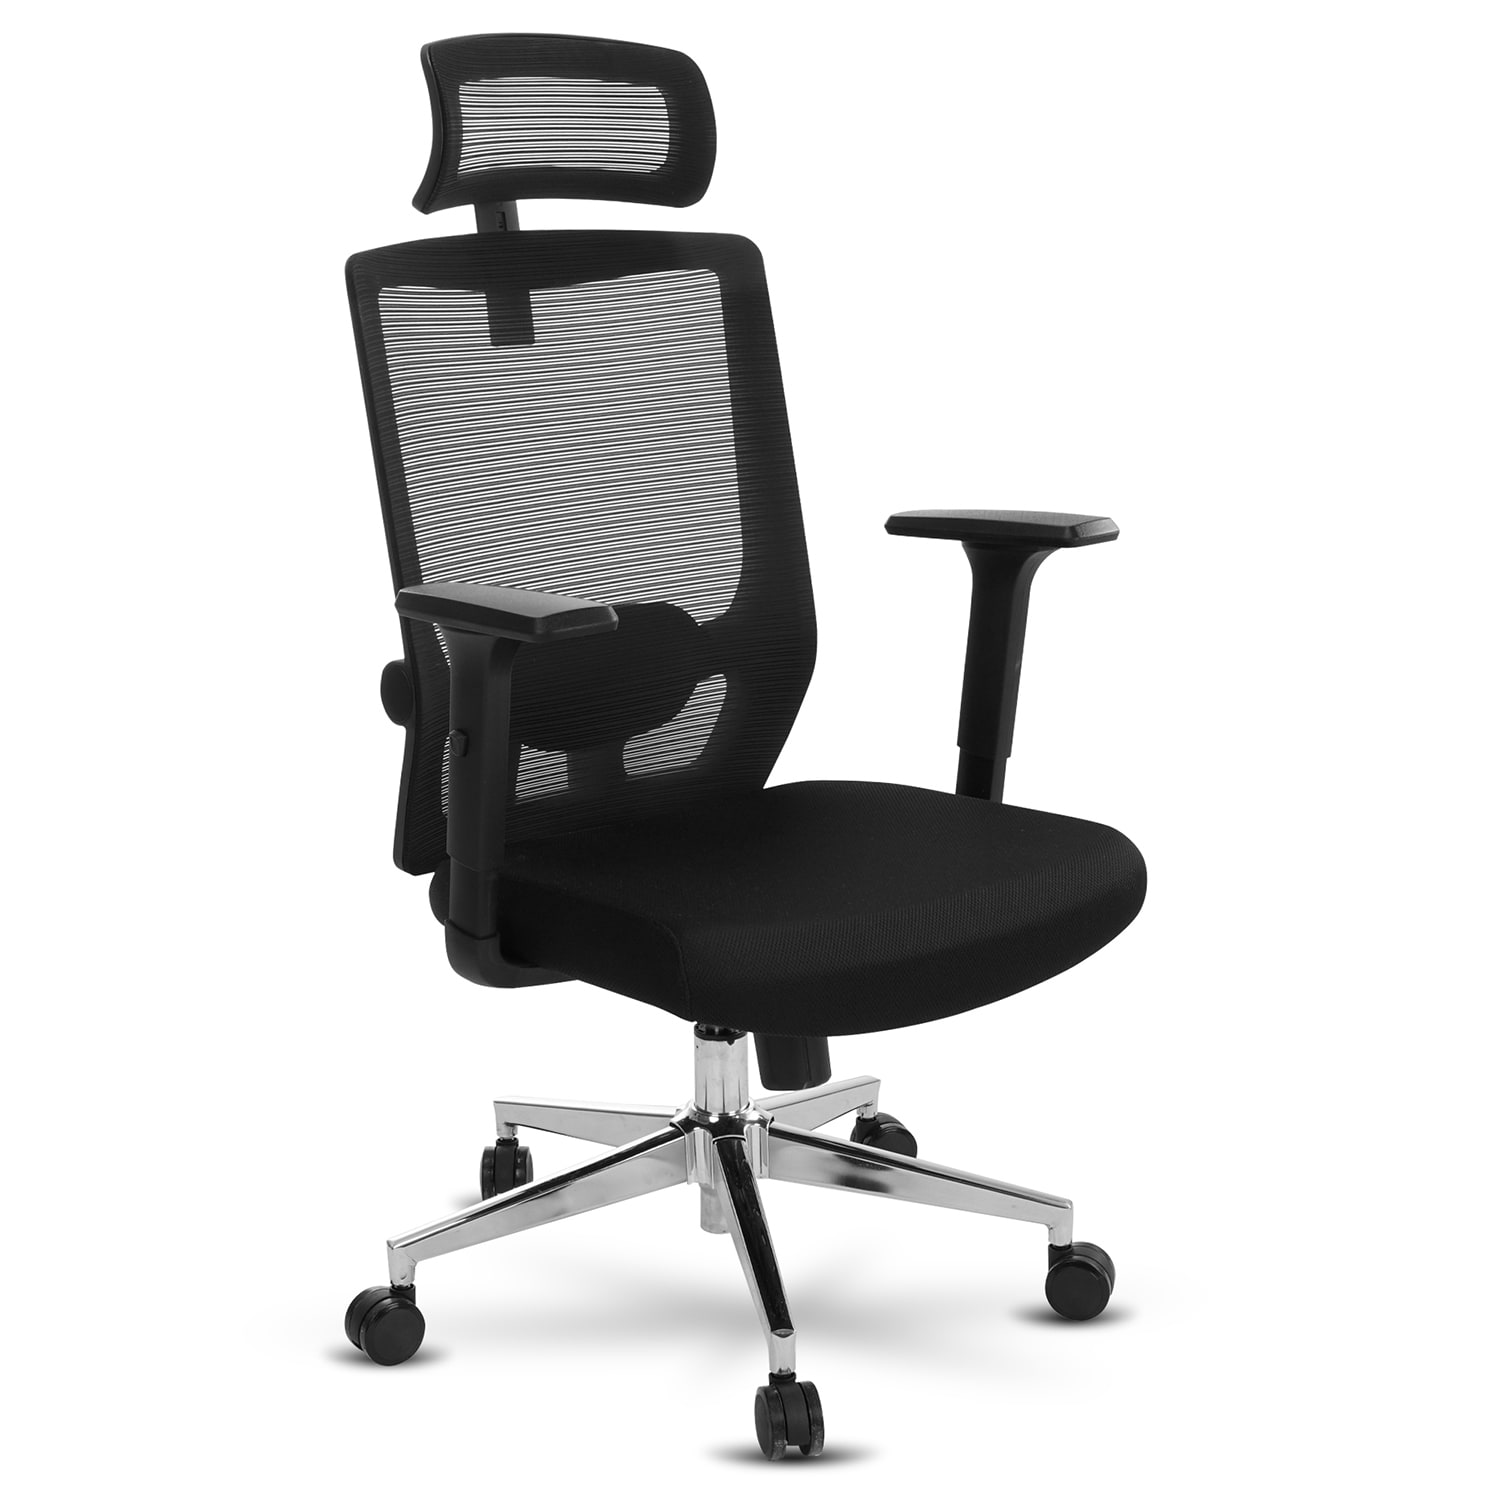 Chair Headrest Computer Swivel Lifting Office Chair Adjustable Headrest  Neck Protection Chairs Headrest Office Chair Accessories